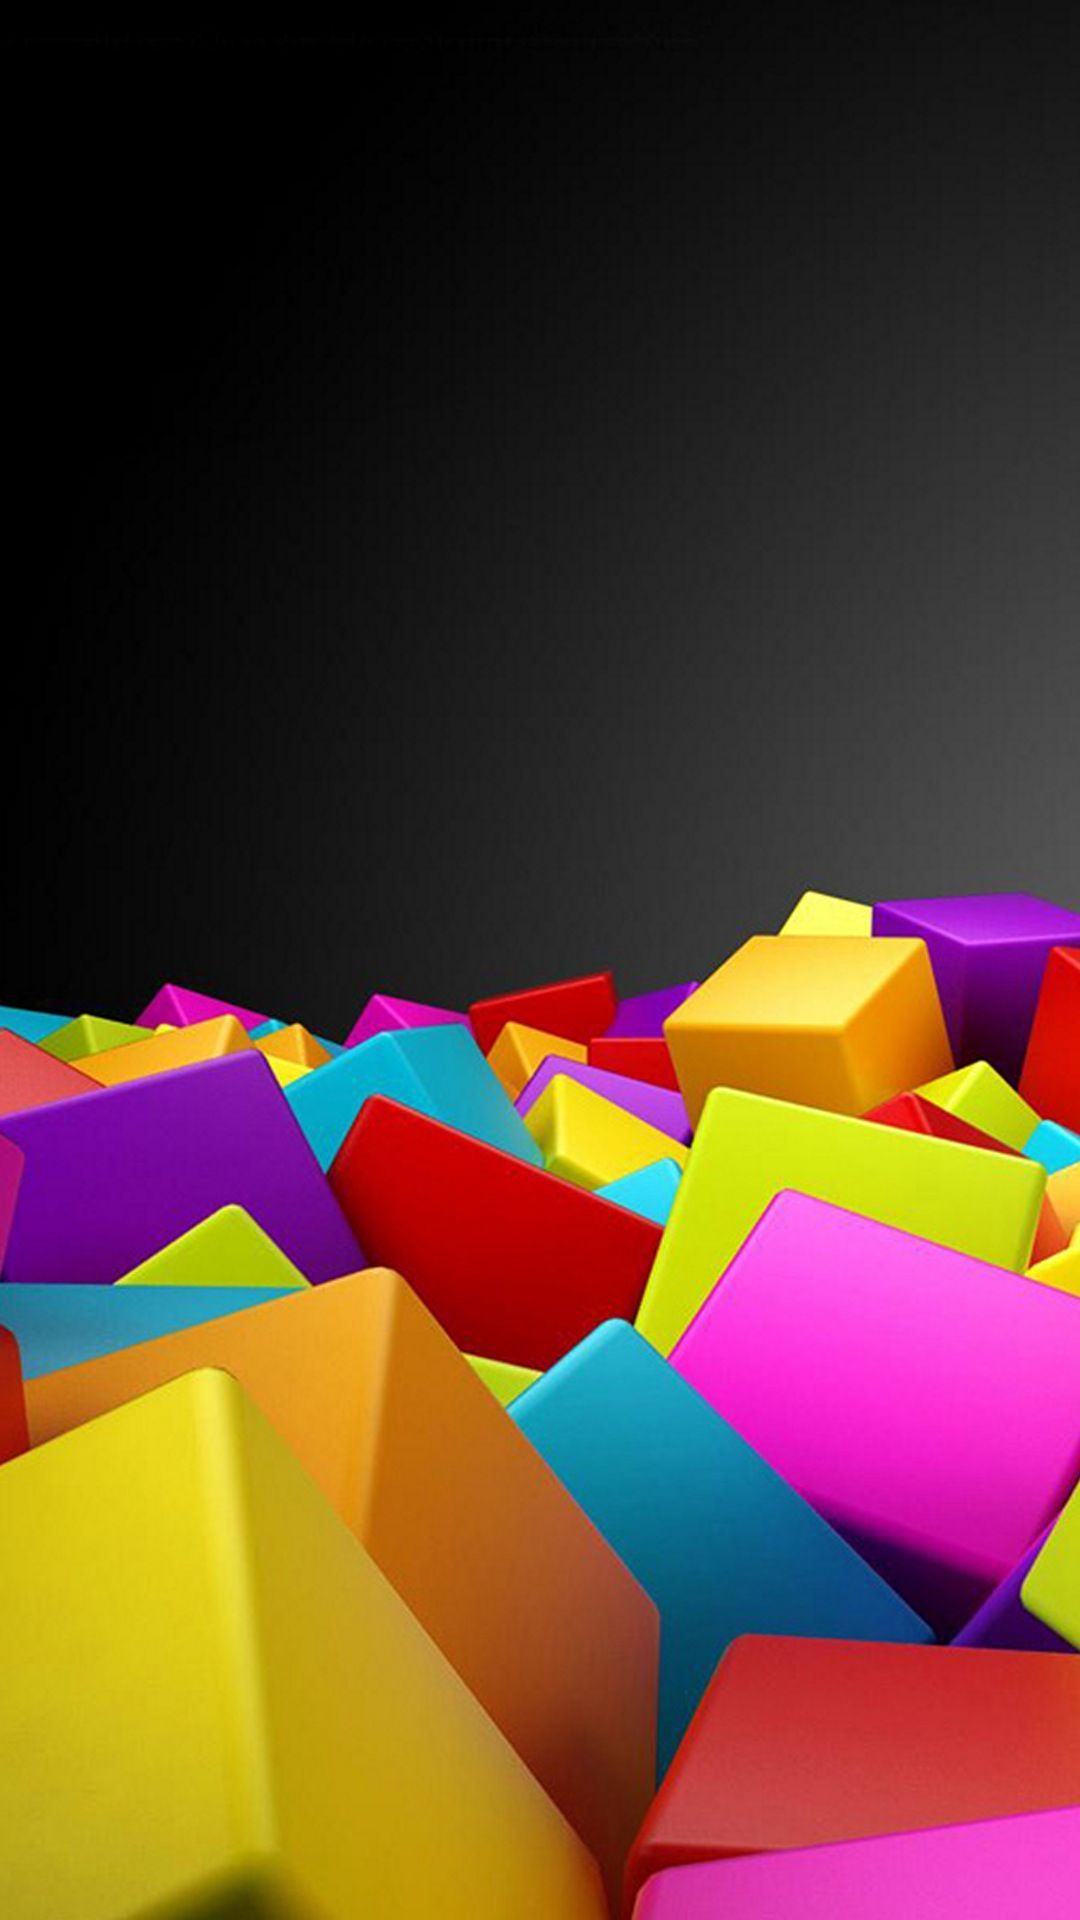 3D Colorful Image Hupages Download iPhone Wallpaper